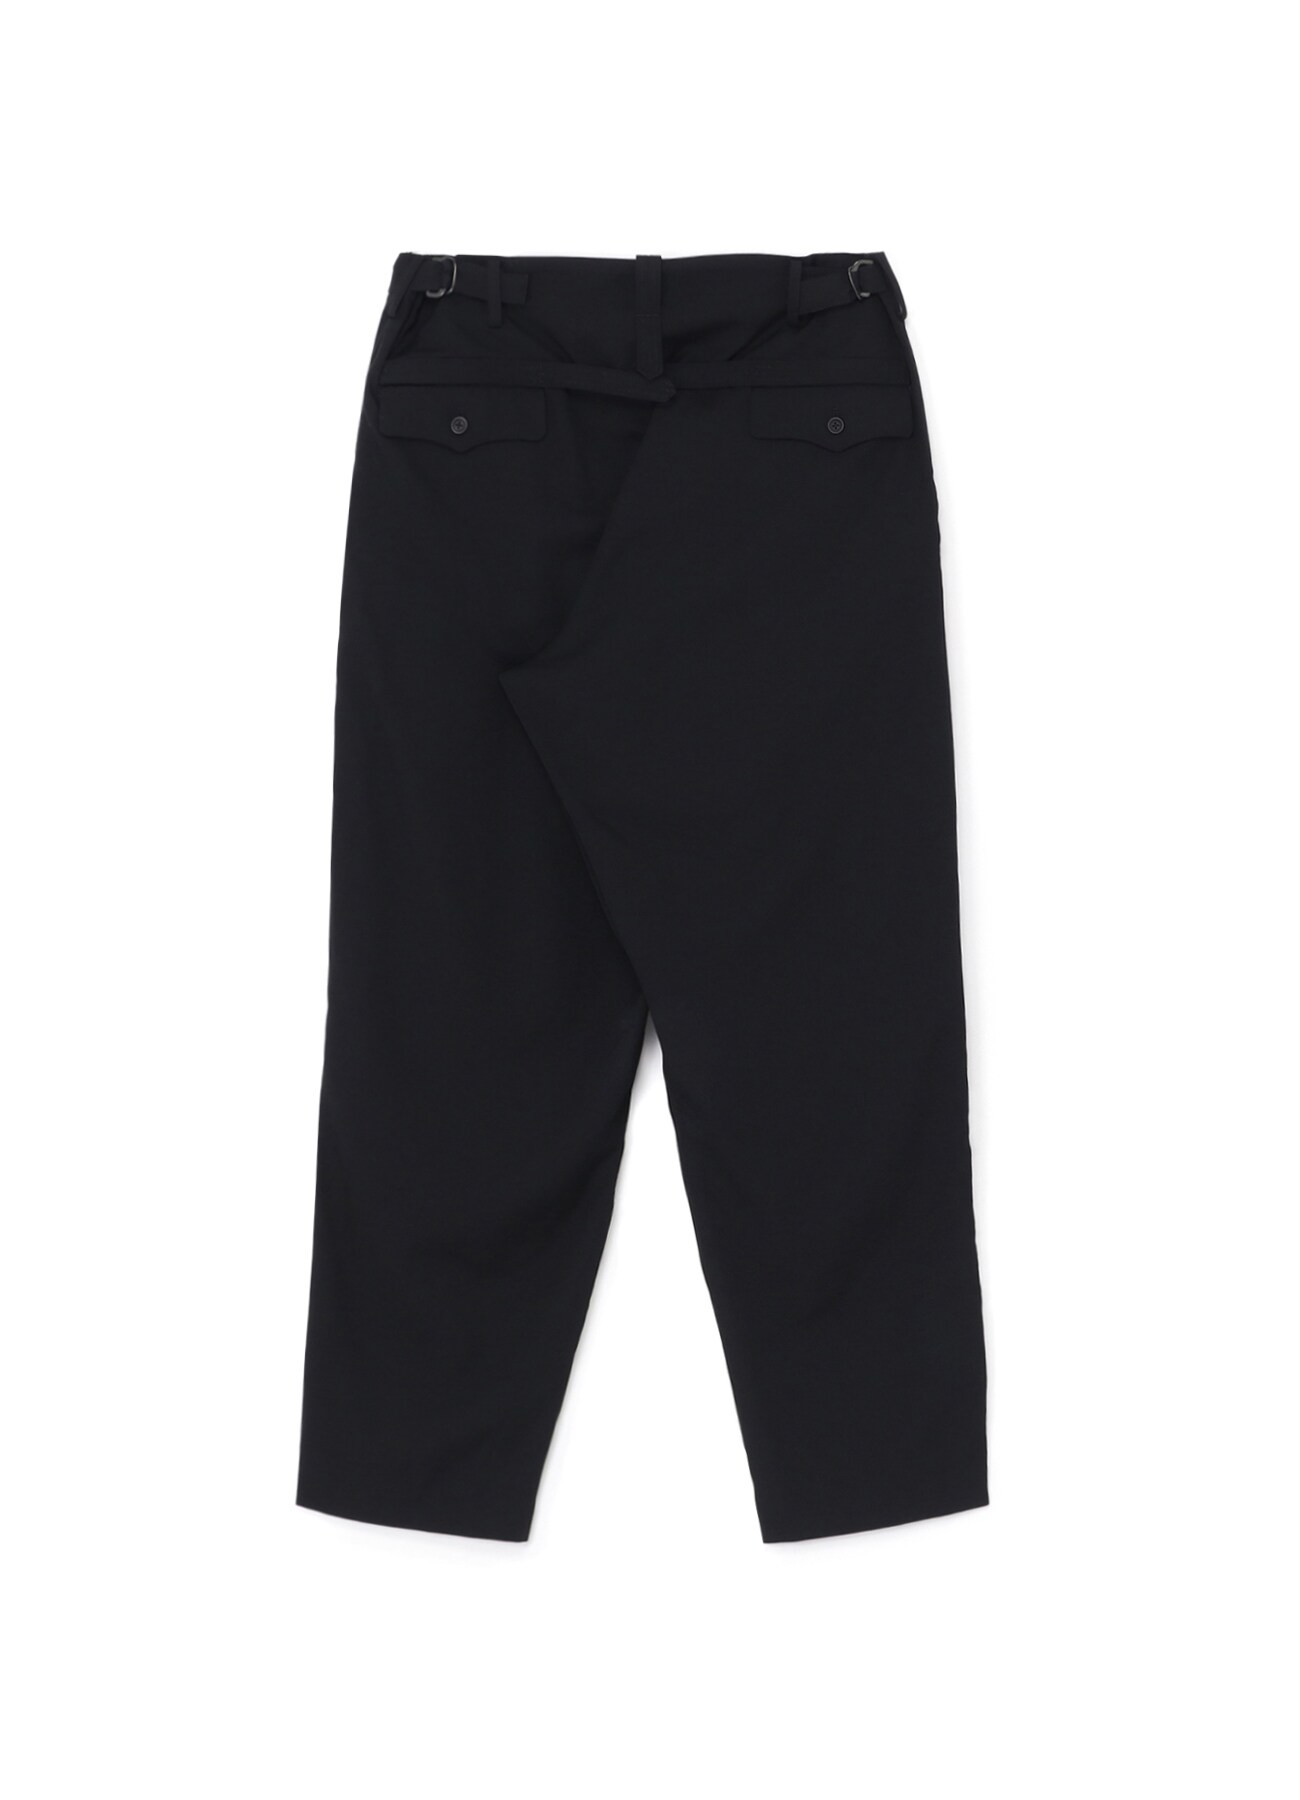 WOOL GABARDINE PANTS WITH DECORATIVE CLOTH(S Black): Y's for men 